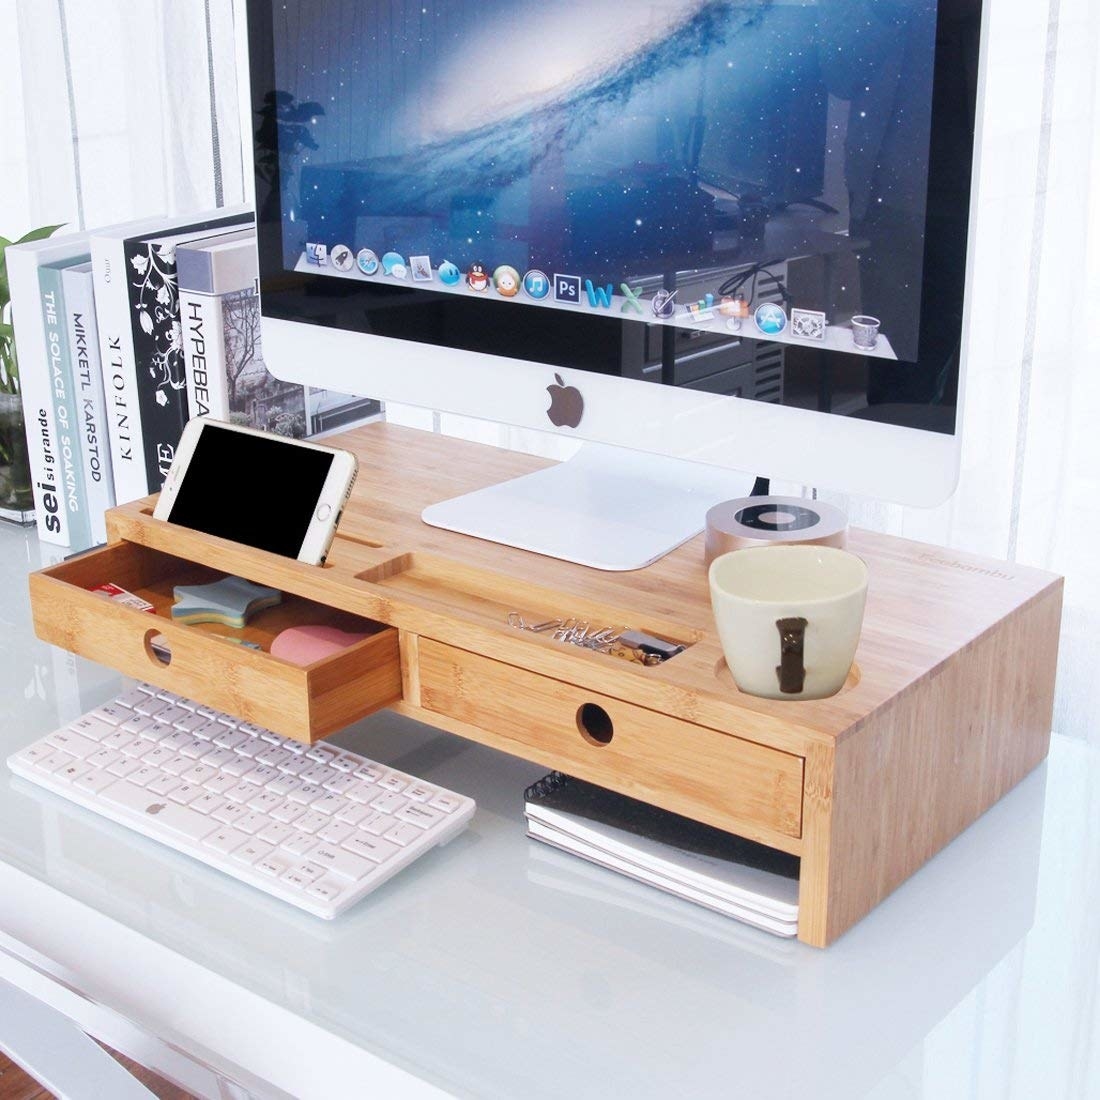 the desktop stand is sitting on a desk. It looks like a mini platform and is made of wood. It has two drawers and space underneath to slide a keyboard under and a notebook.